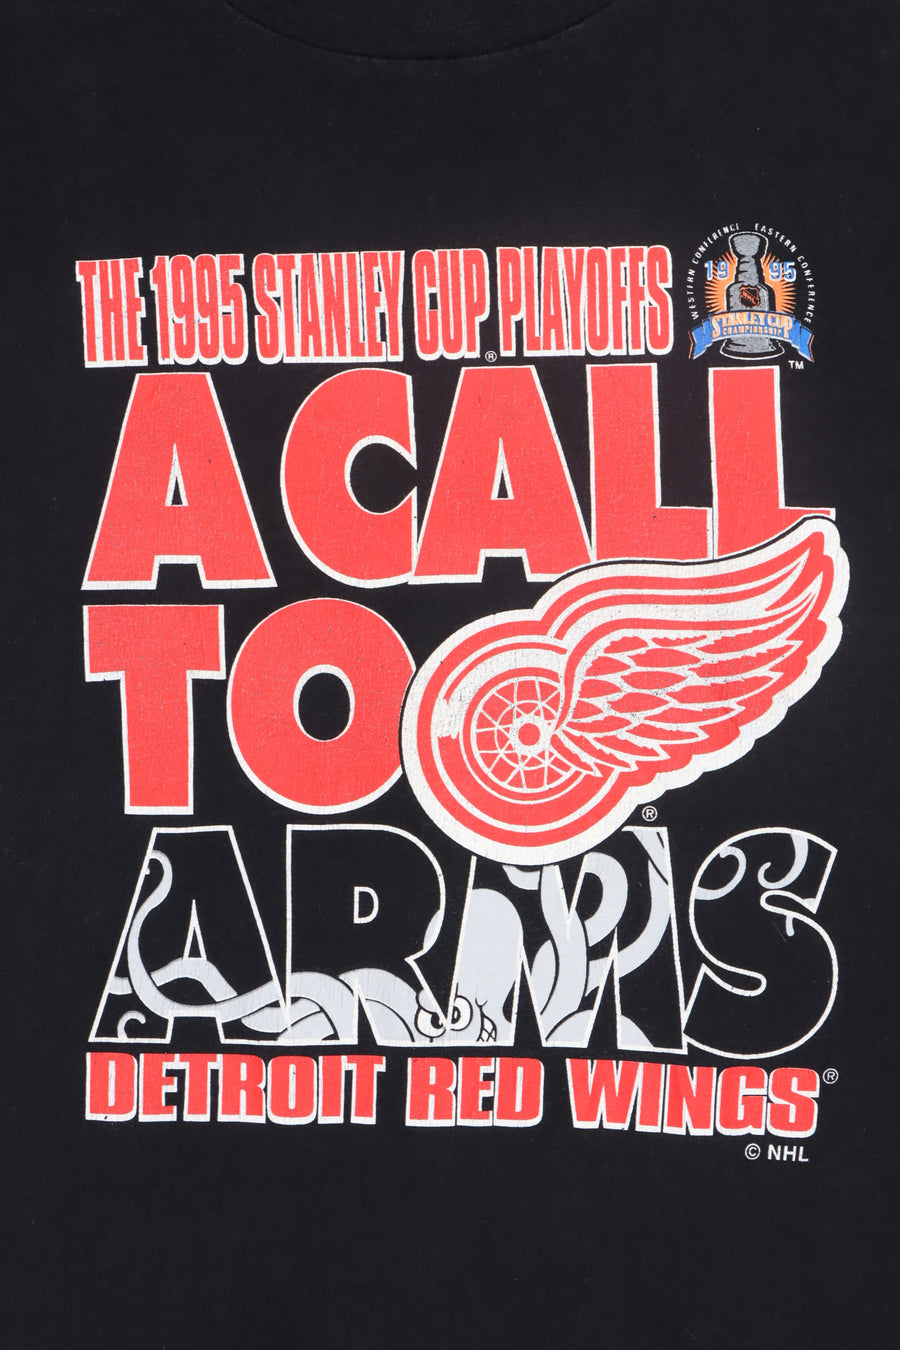 NHL 1995 Detroit Red Wings "A Call to Arms" T-Shirt (L)